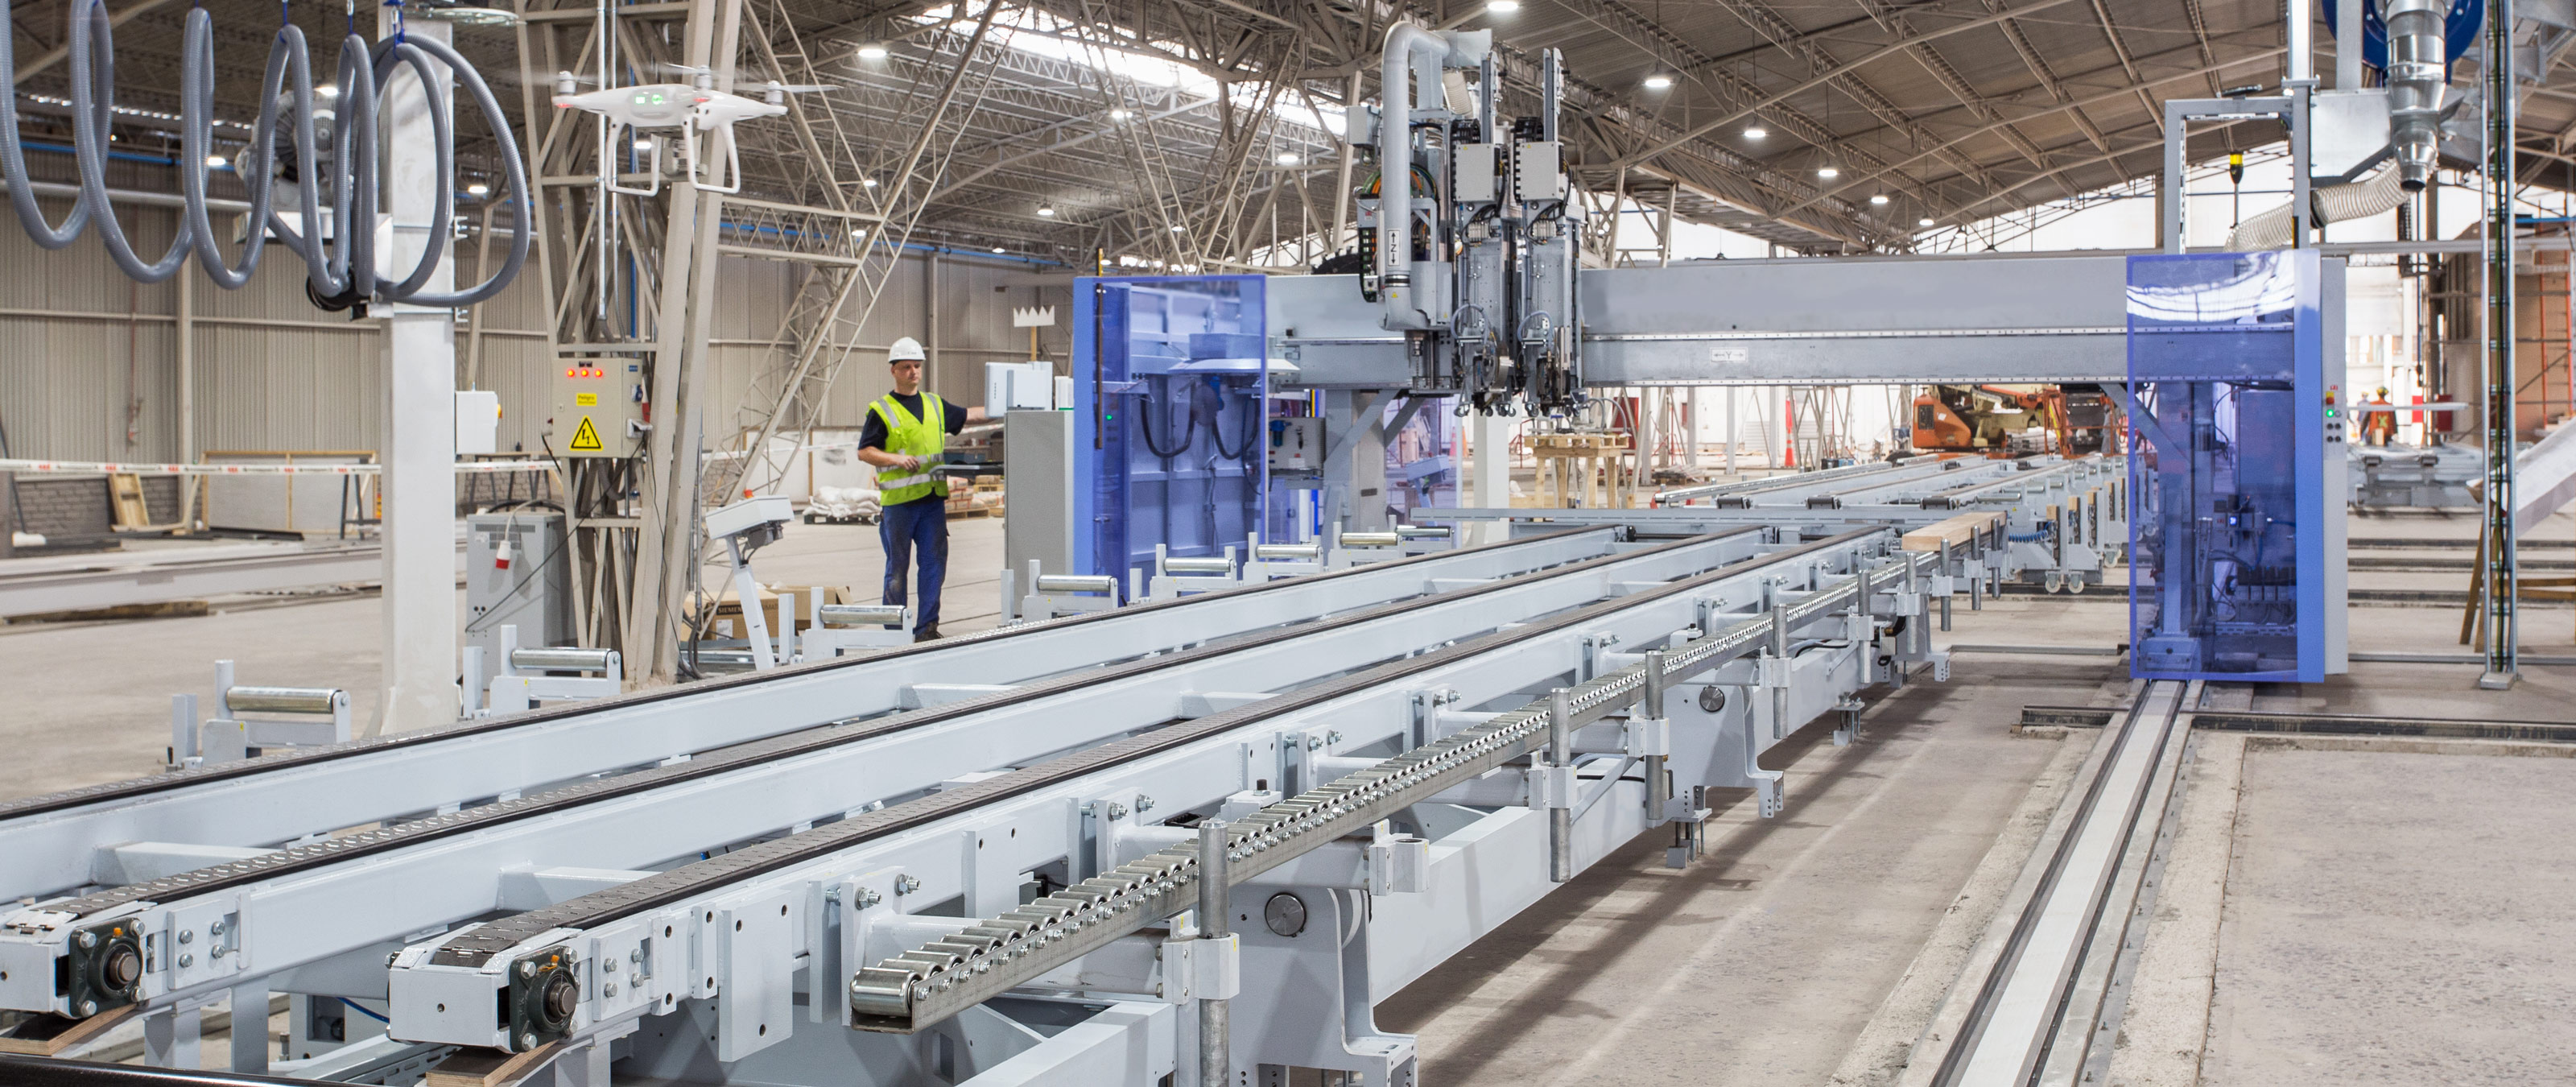 The production line includes a WALLTEQ M-380 multifunction bridge and three assembly tables.